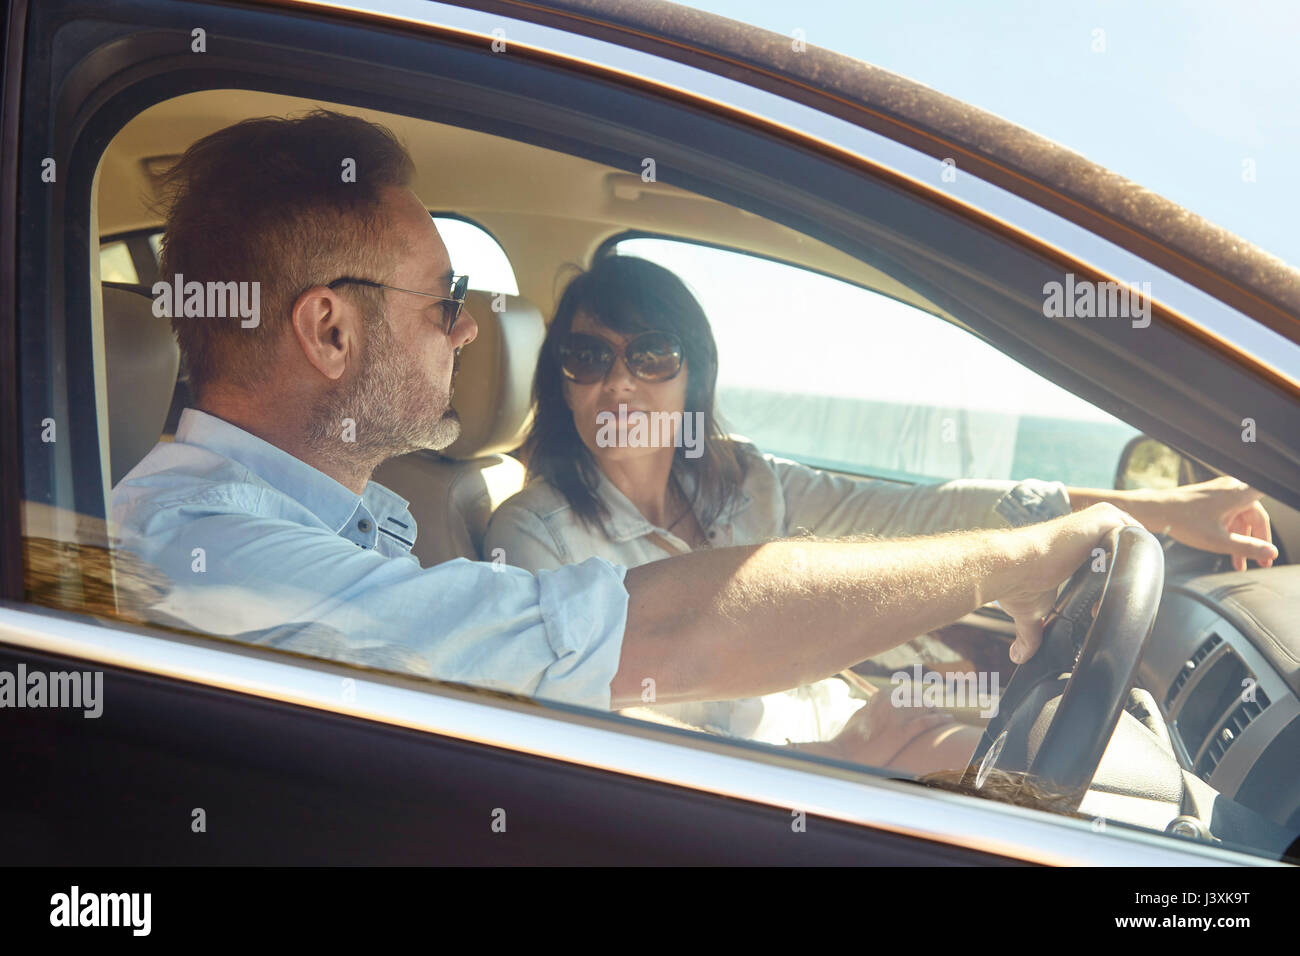 Couple in car, man driving, woman pointing ahead Stock Photo